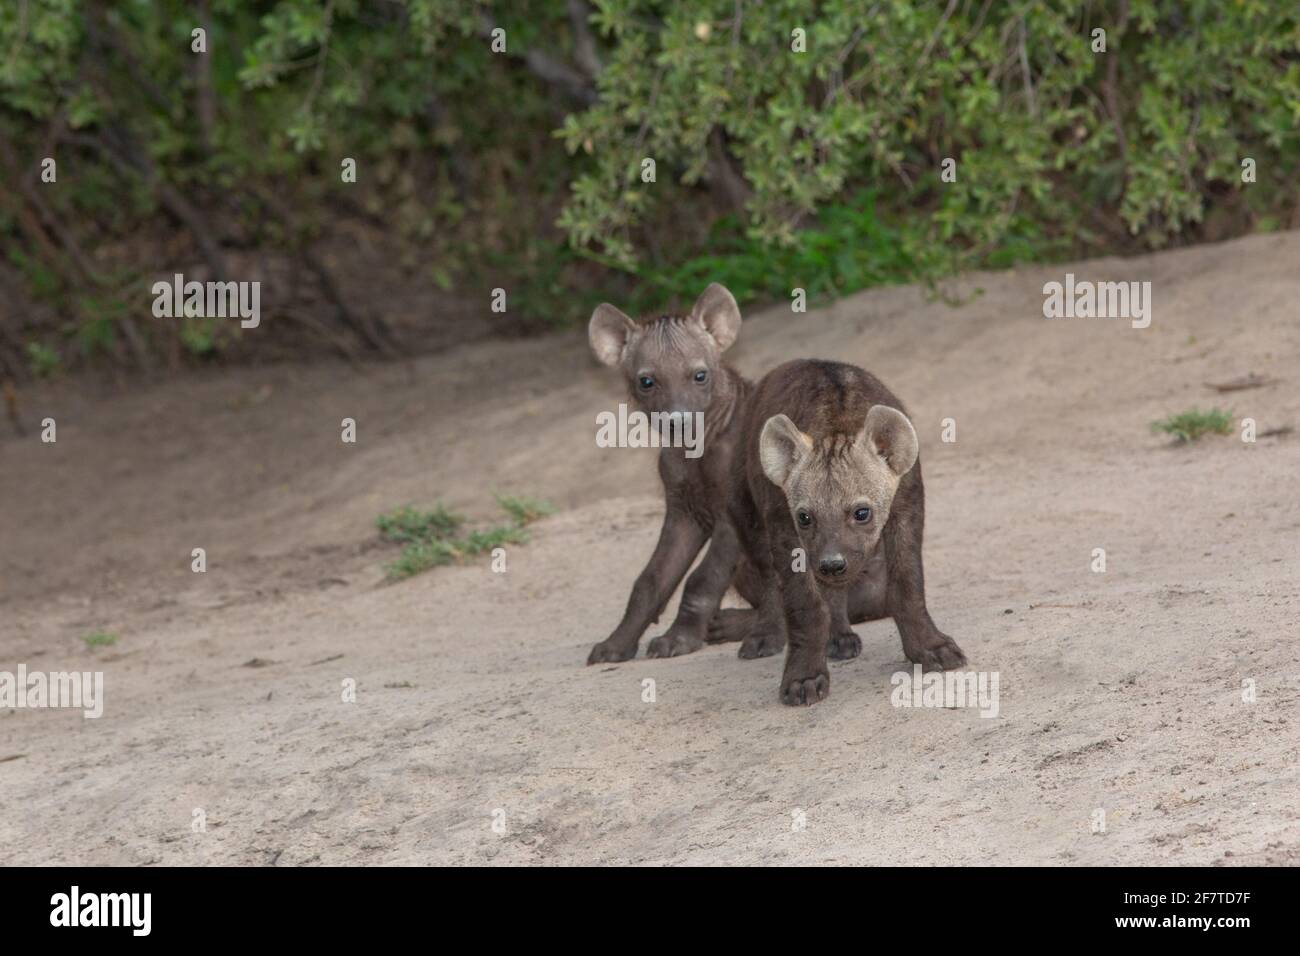 Spotted Hyaena, Hyena (Crocuta crocuta). Two sibling cubs or pups, juvenile young of the same age, from the same mother. Den communally. Outside their Stock Photo